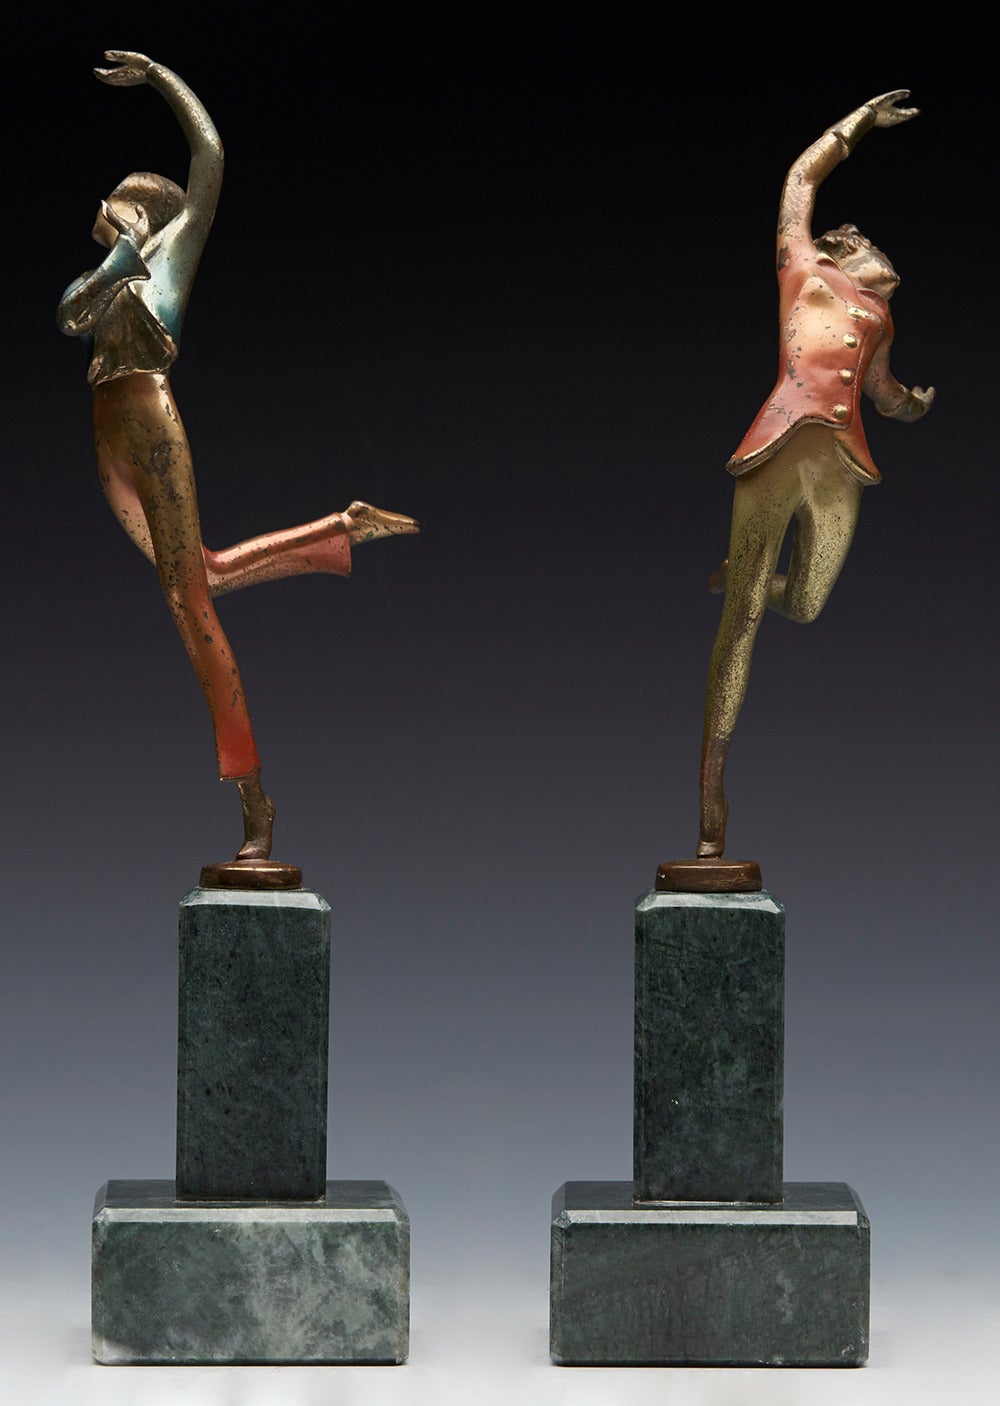 A pair of Art Deco cold painted bronze dancer figures by Austrian artist Josef Lorenzl and dating from around 1930. The figures are mounted on a polished stone column and each are cold painted in colored metallic glazes. They both have Lorenzl